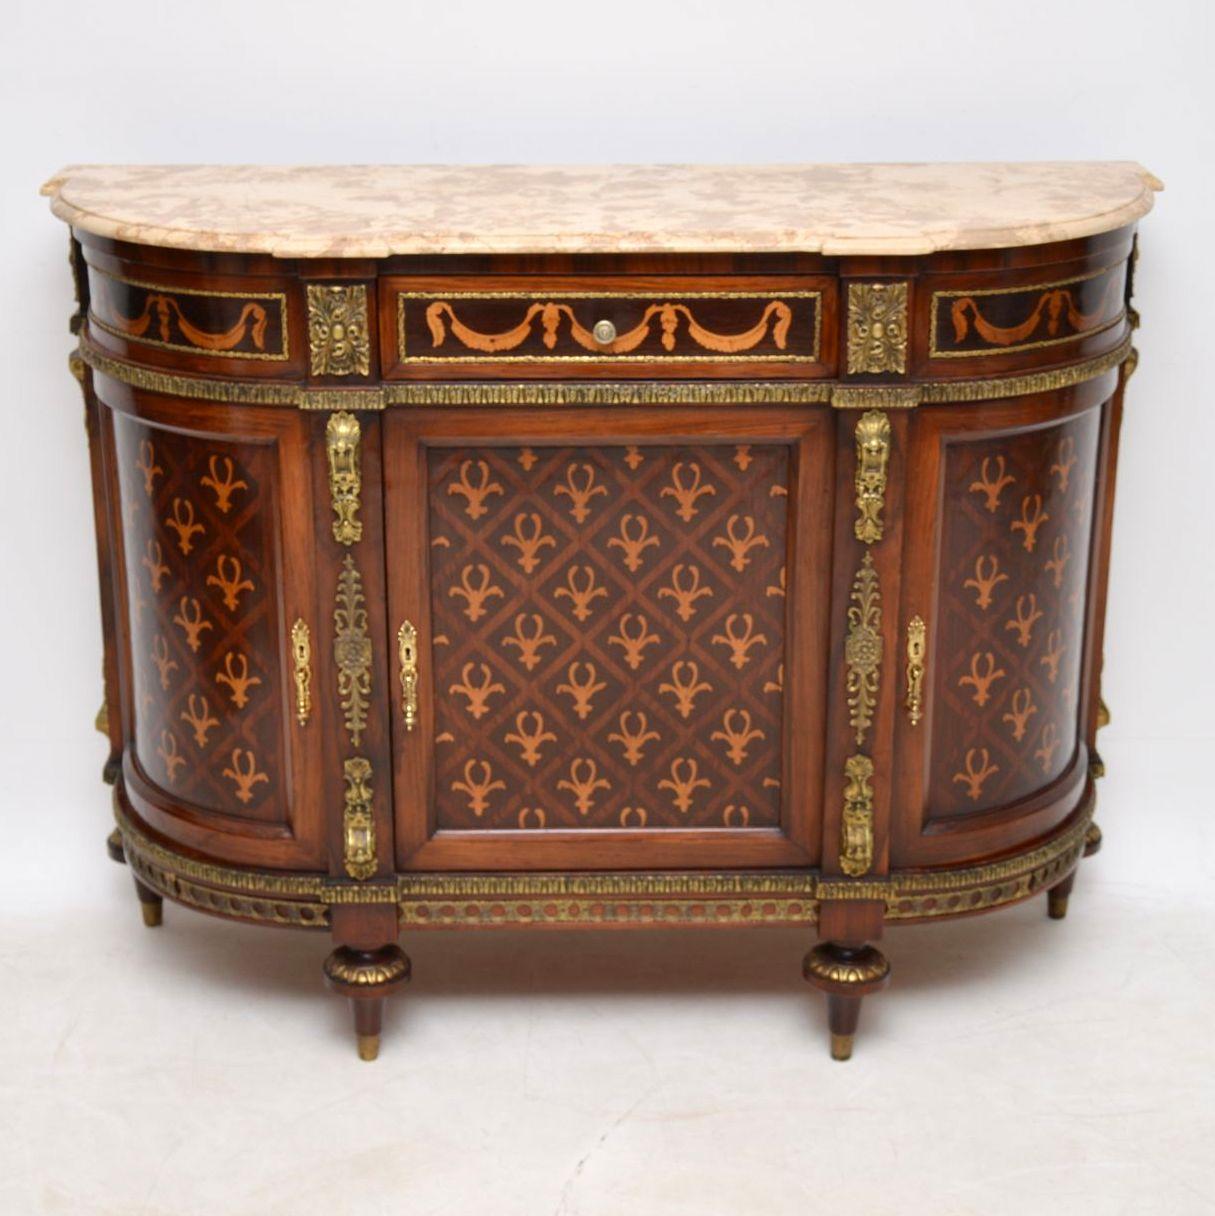 Very impressive antique Swedish marble-top side cabinet, which could be used as a sideboard. It has nice slim proportions from back to front & I would date it to around the 1910s-1920s period. This cabinet is full of intricate marquetry all-over